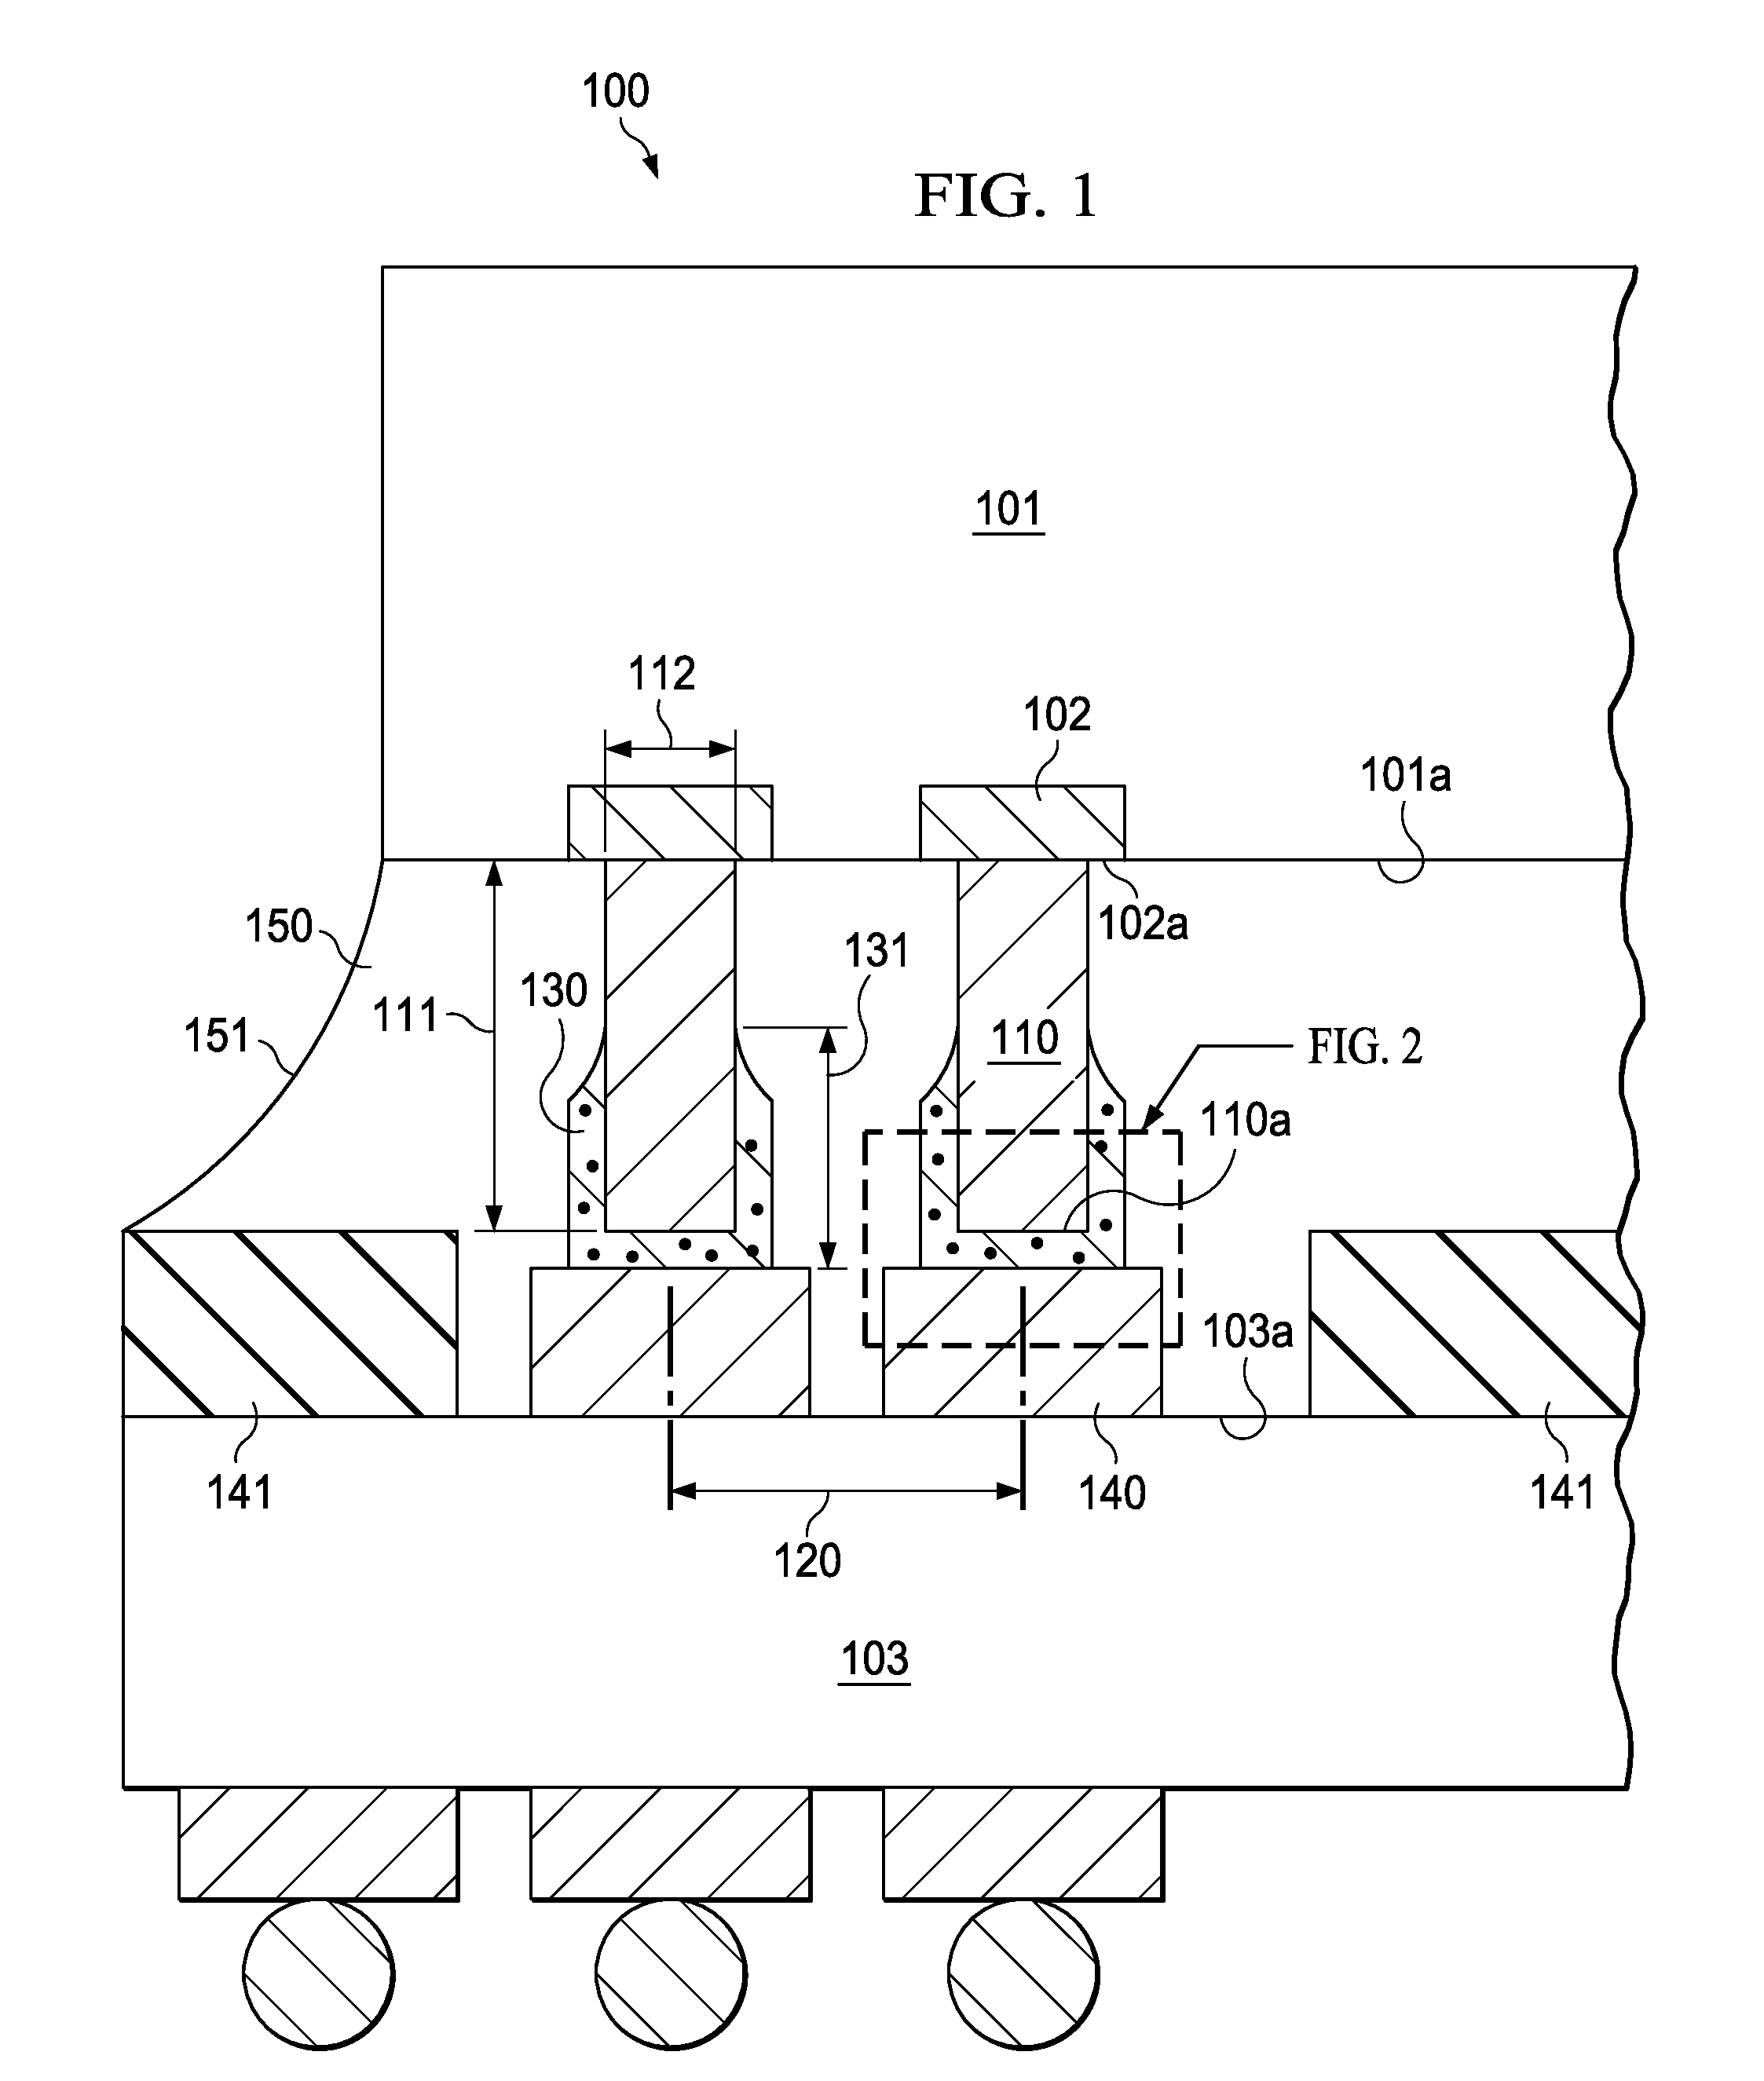 Method for low stress flip-chip assembly of fine-pitch semiconductor devices